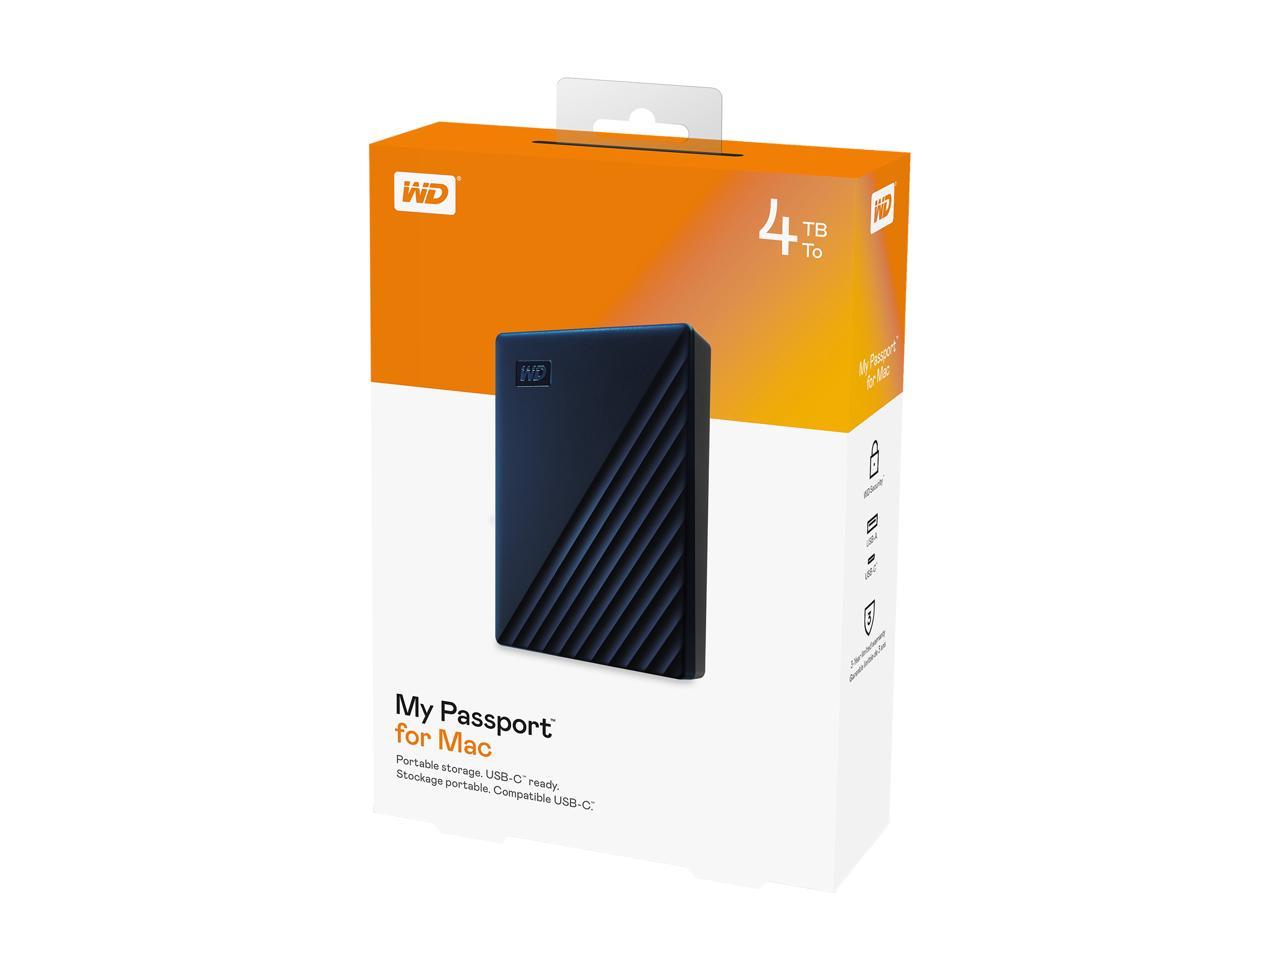 my passport for mac 4tb external usb 3.0 portable hard drive cable